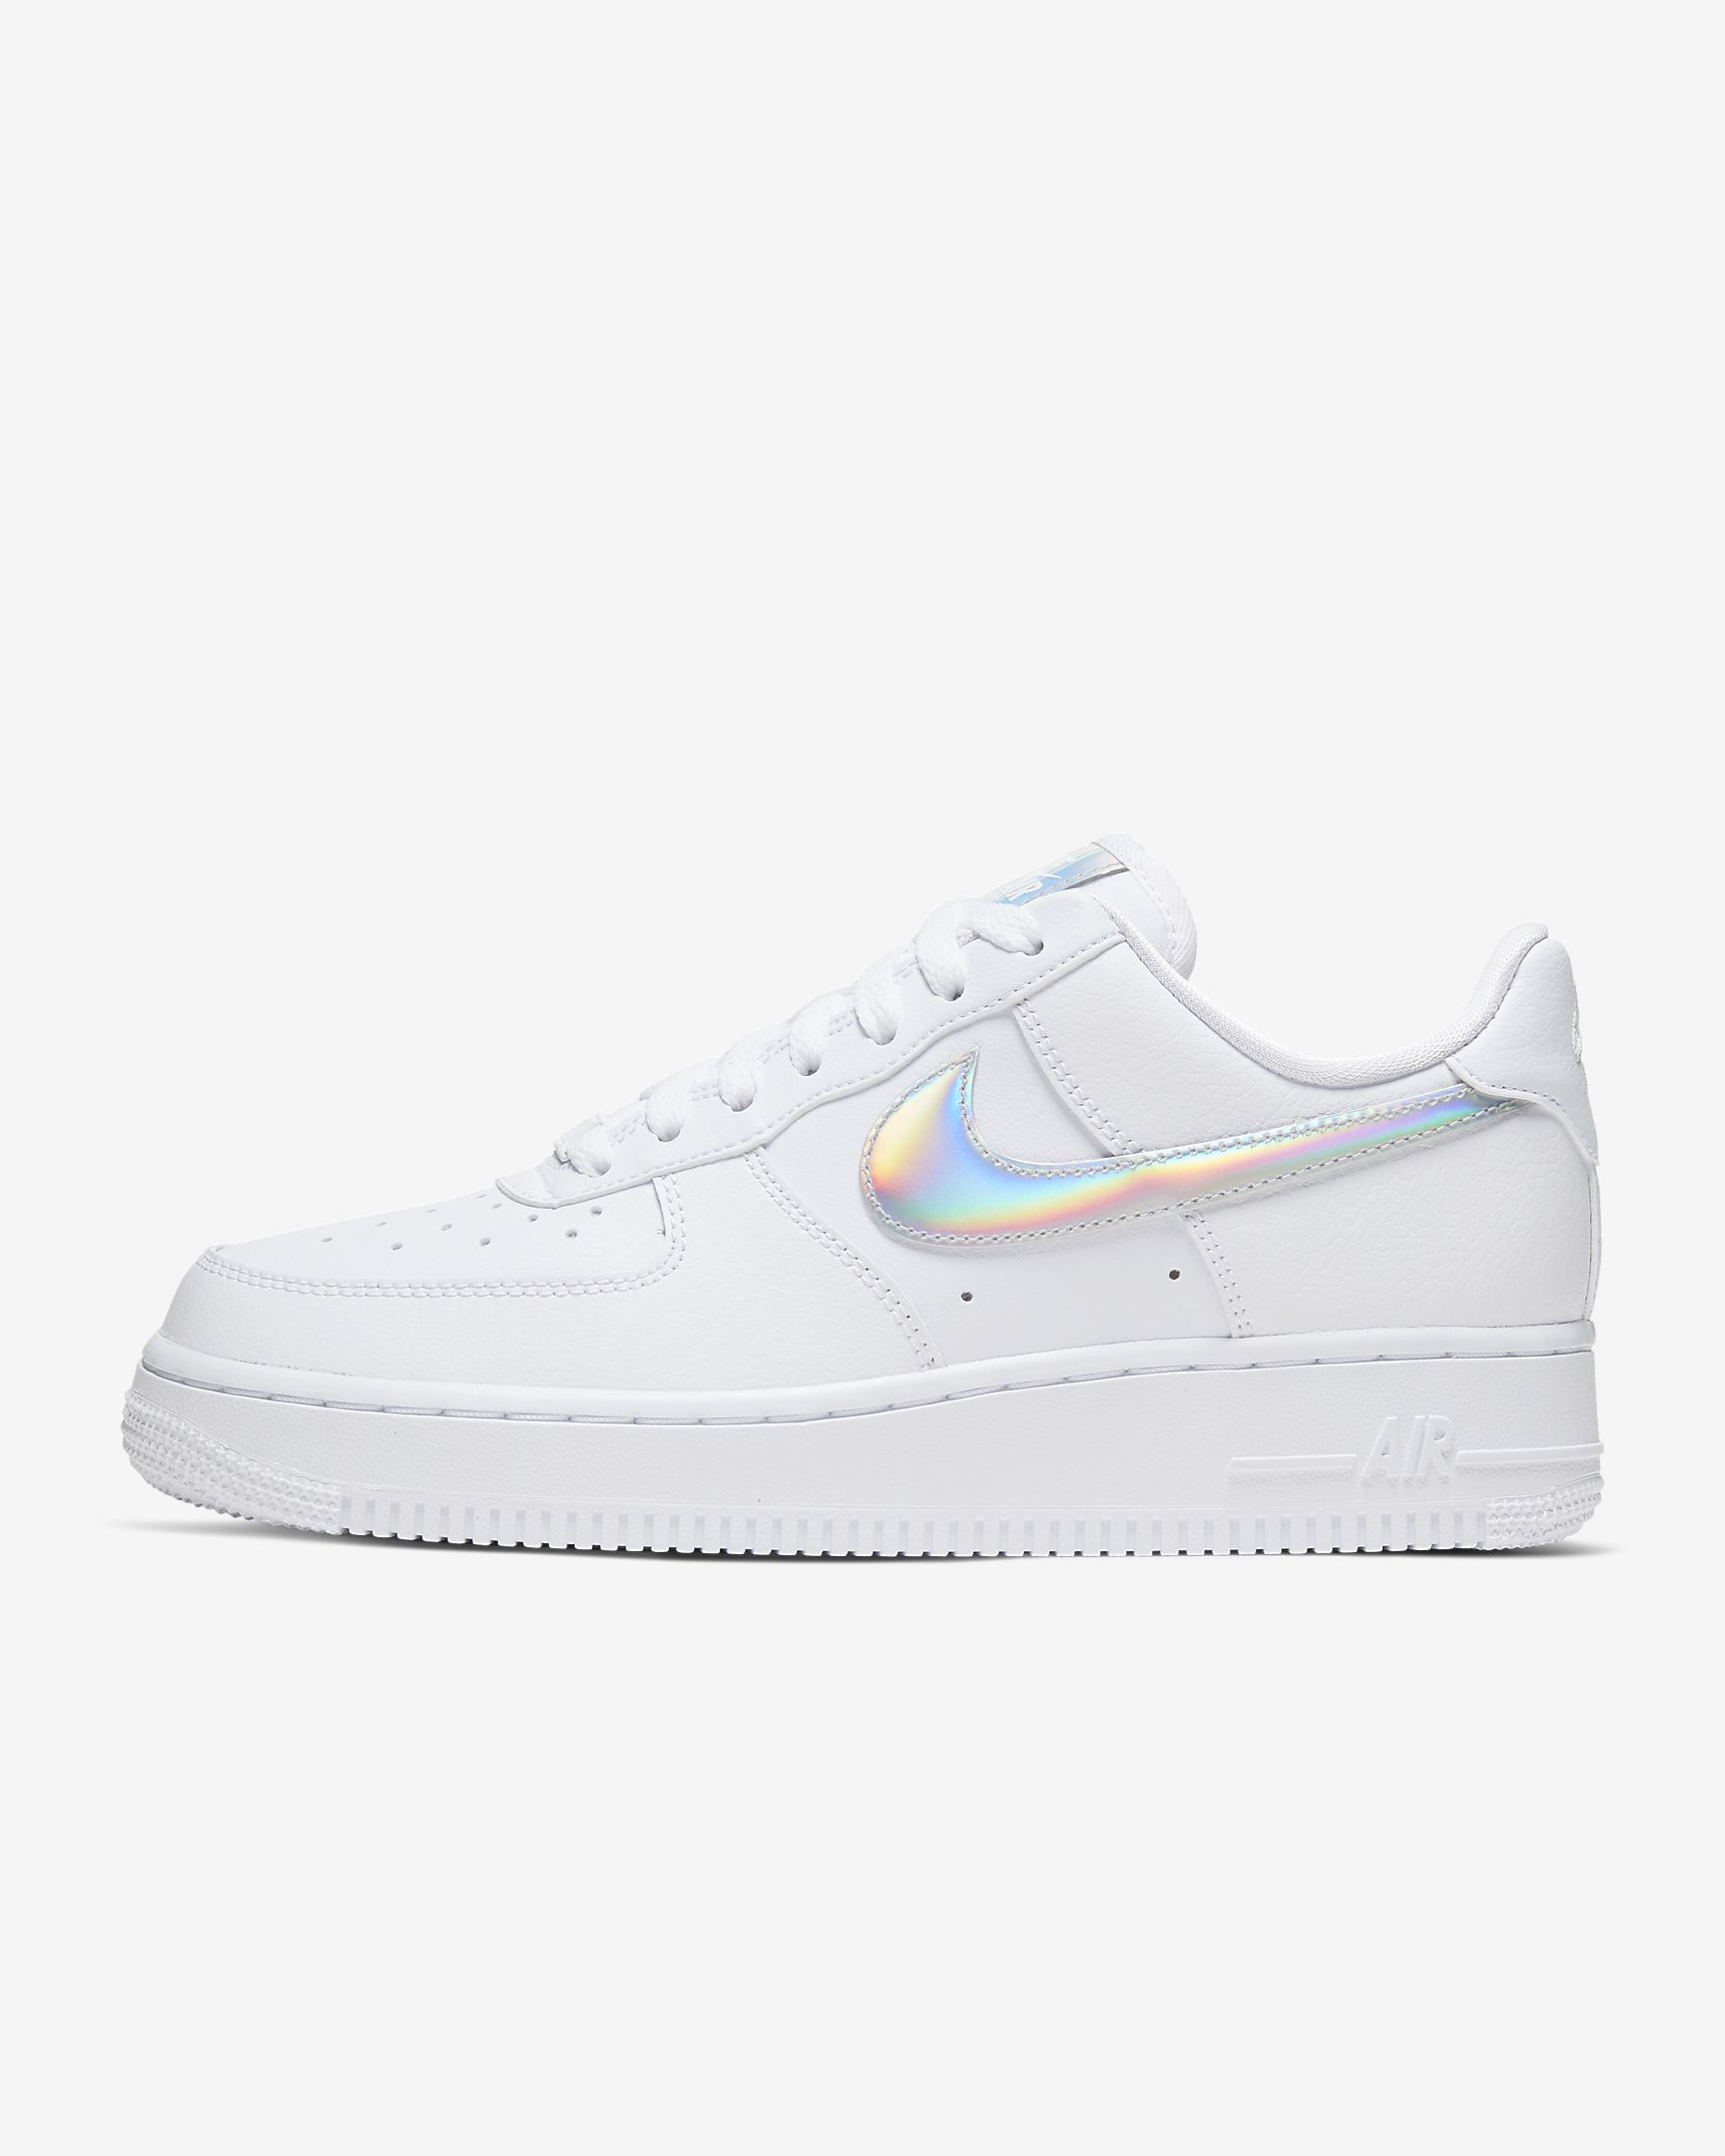 Nike Air Force 1 '07 'White Iridescent'